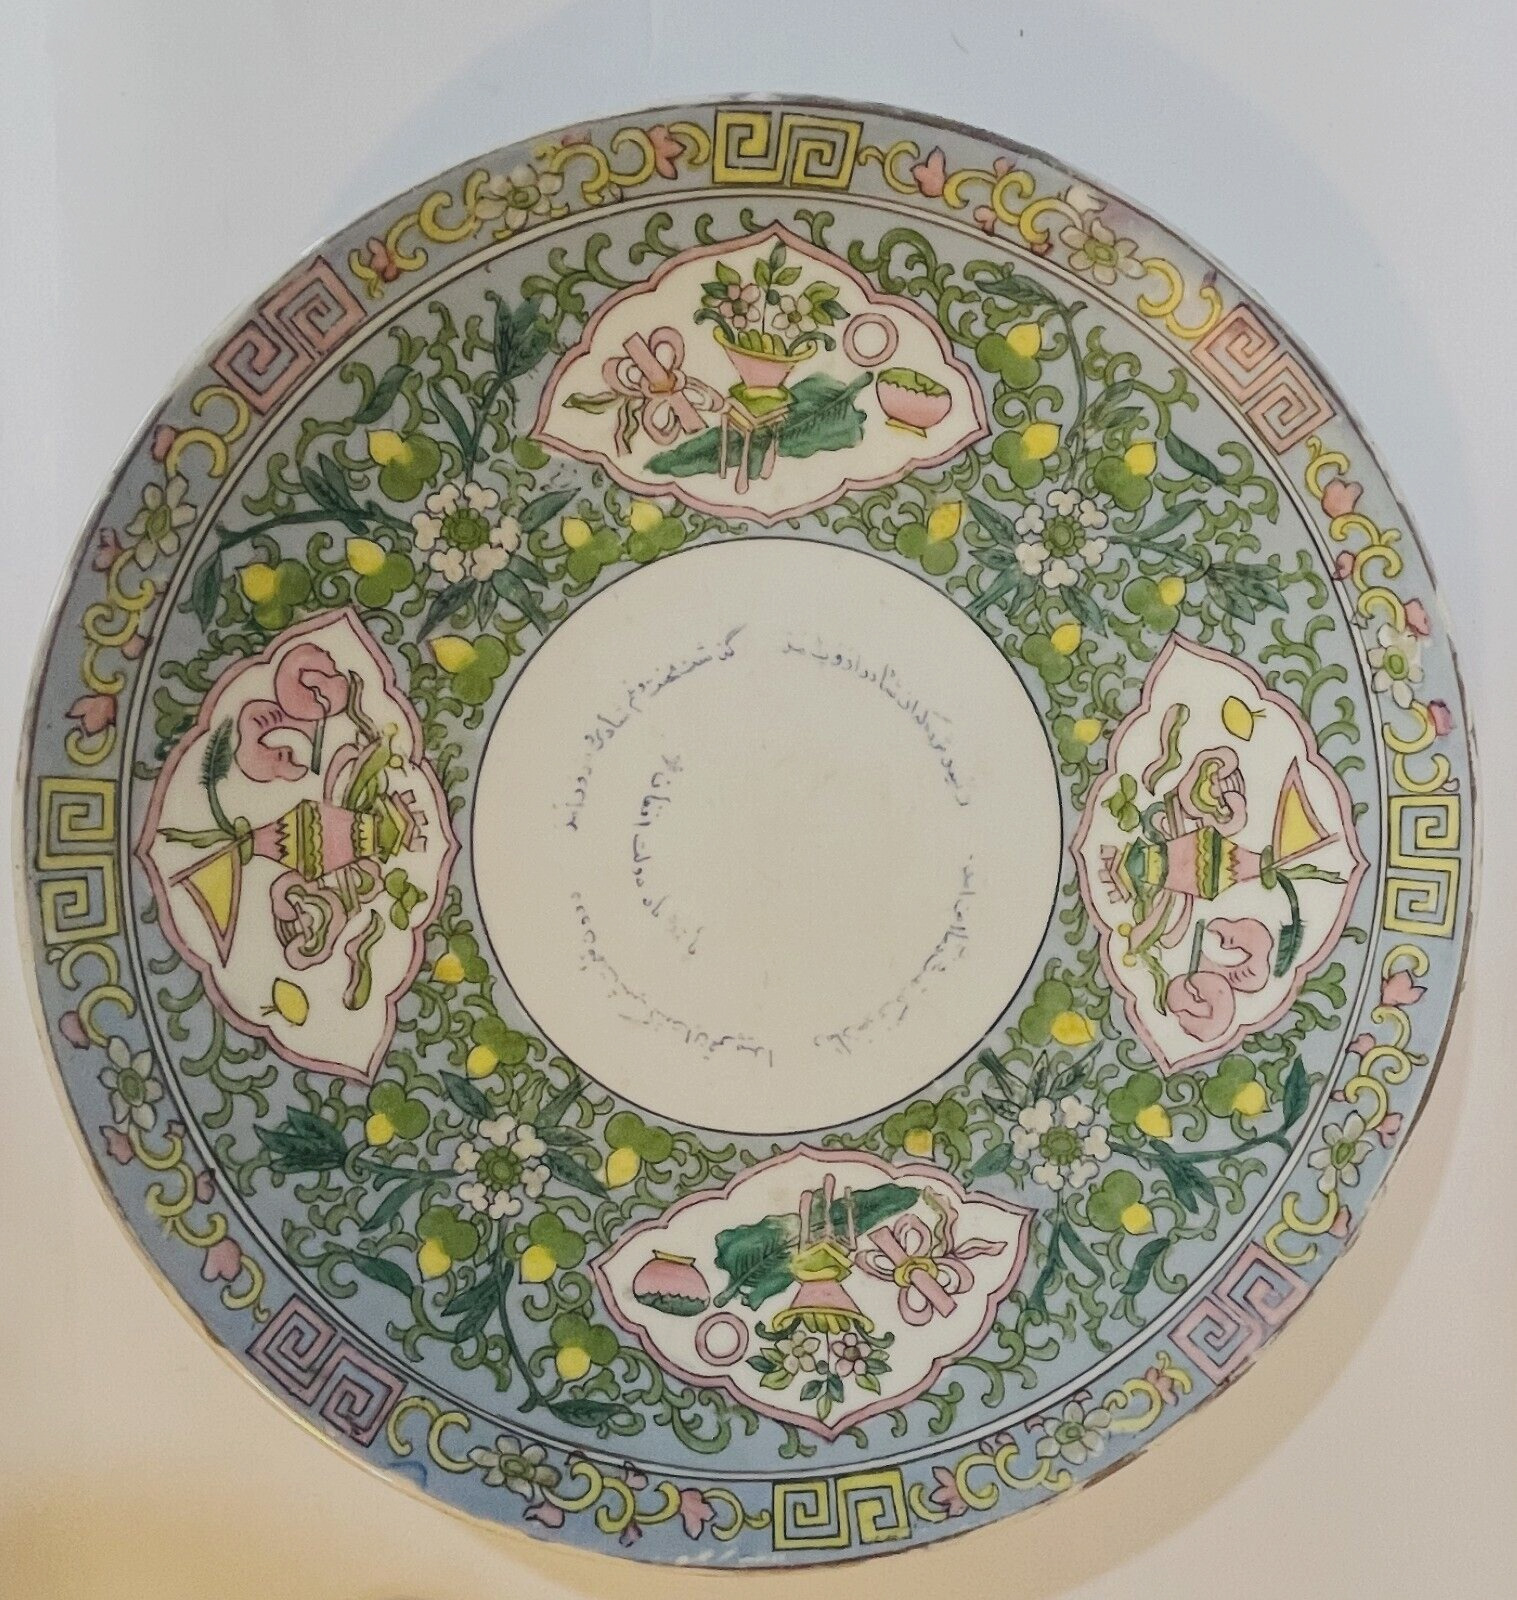 Antique Russian Gardner porcelain Plate 1890’s from Afghanistan Palace